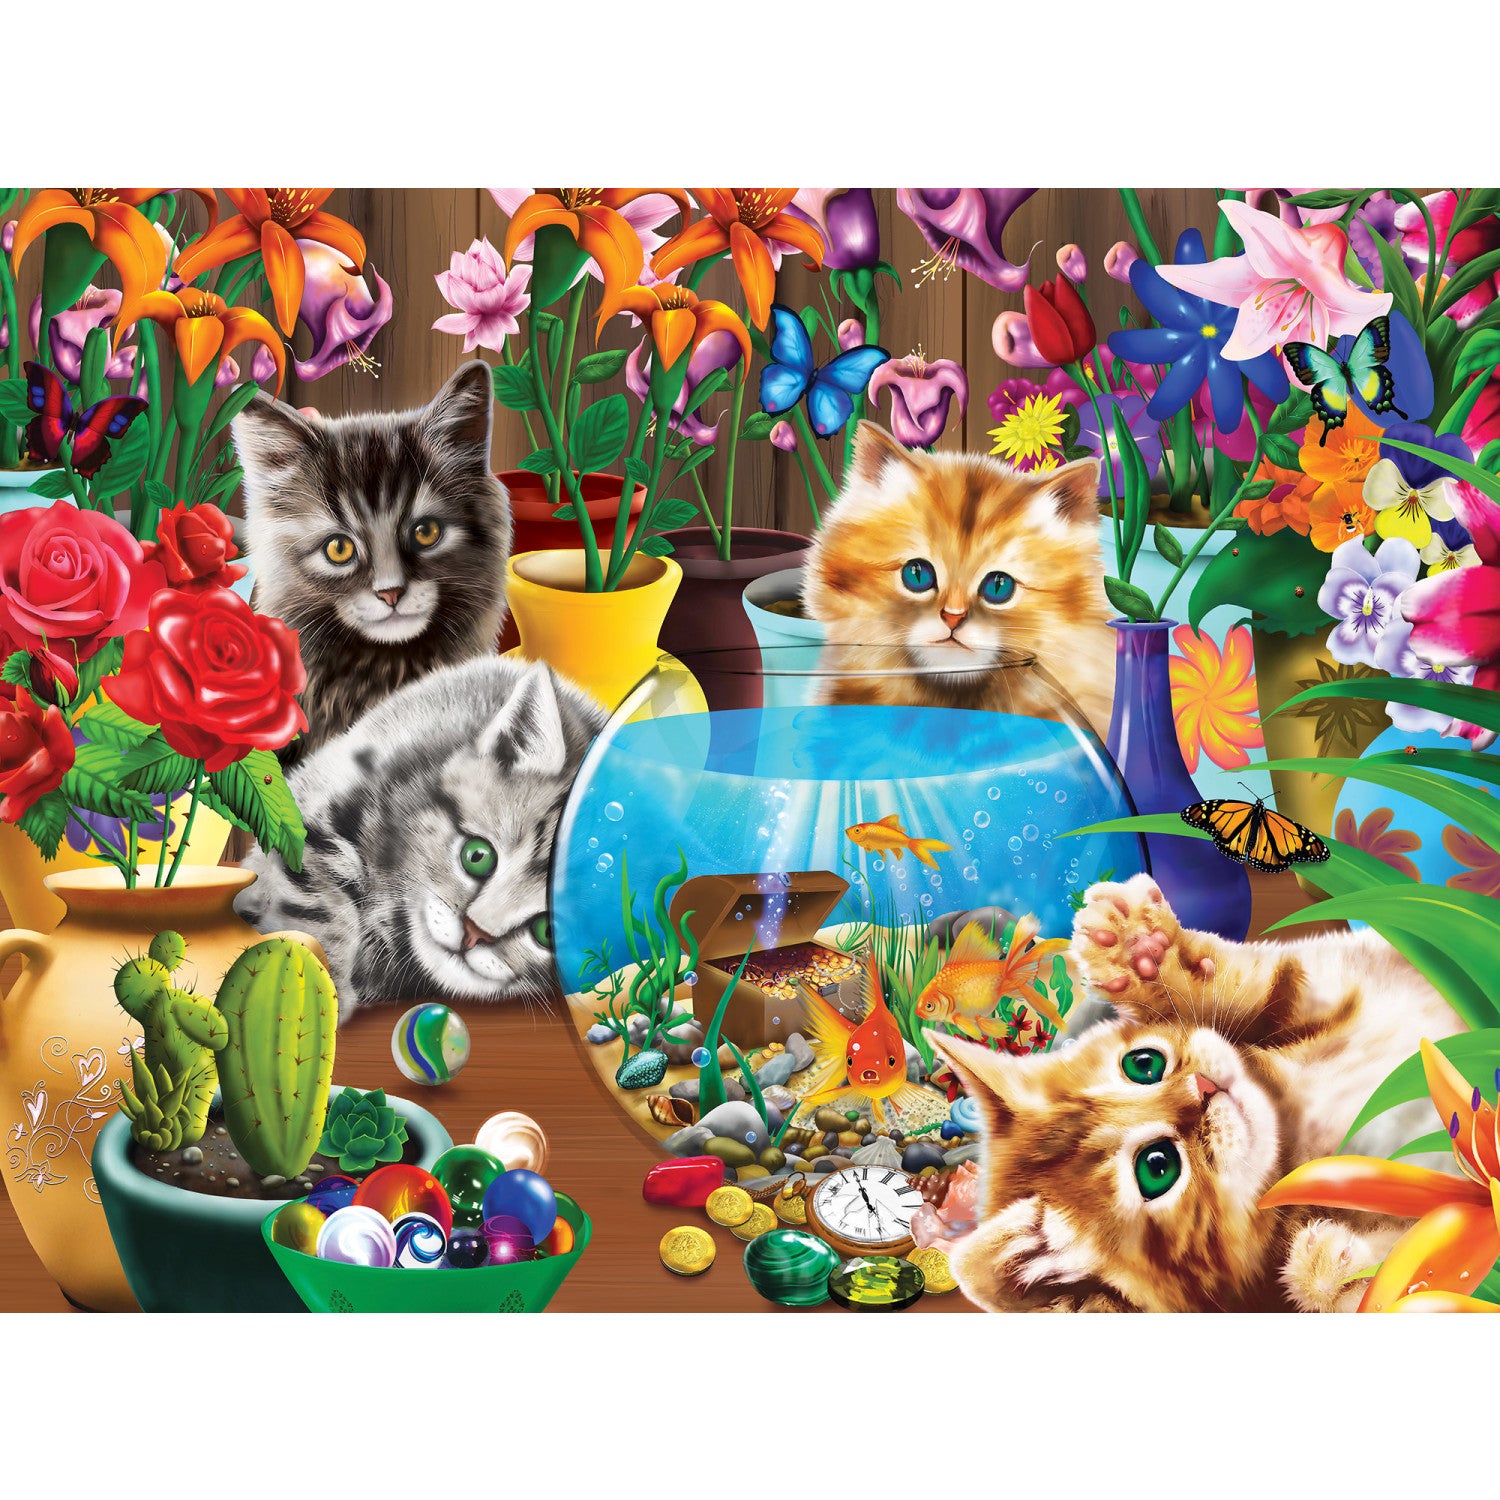 Family Time - Marvelous Kittens 400 Piece Puzzle